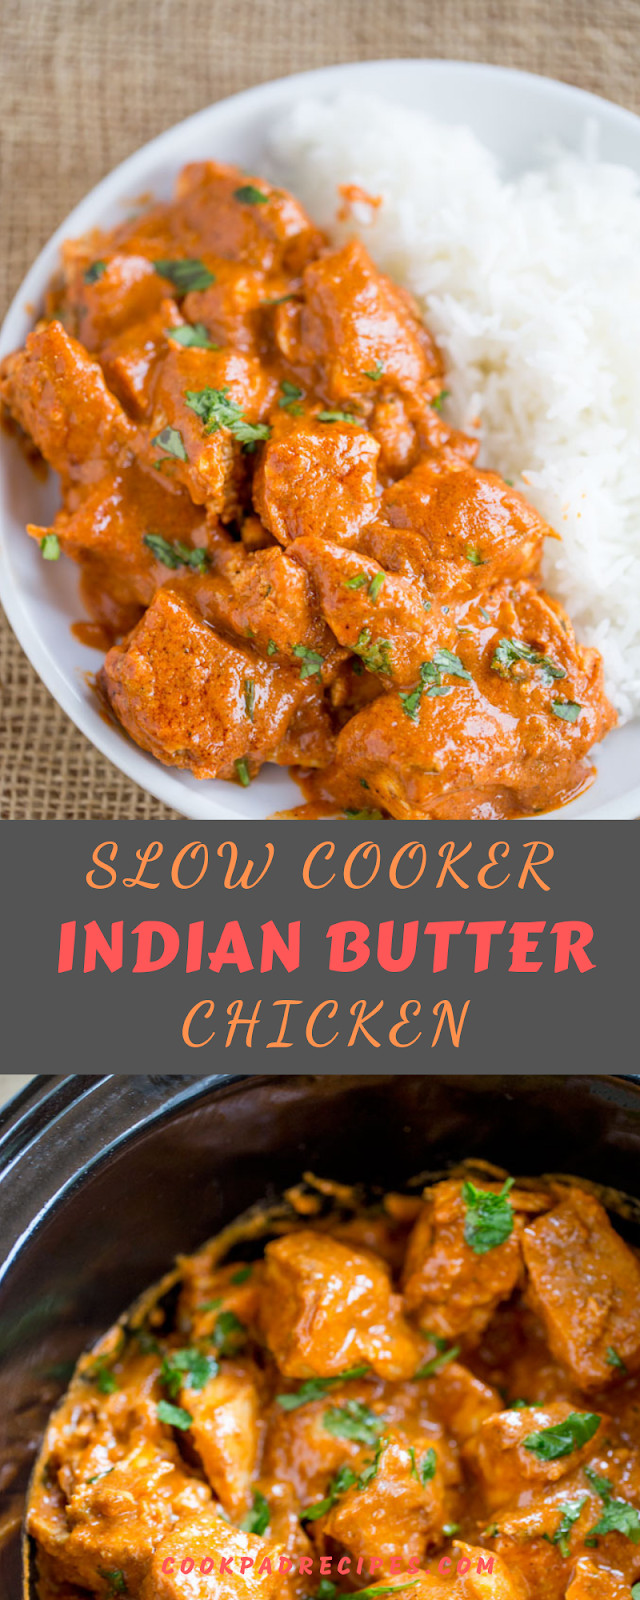 Slow Cooker Indian Vegetarian Recipes
 SLOW COOKER INDIAN BUTTER CHICKEN